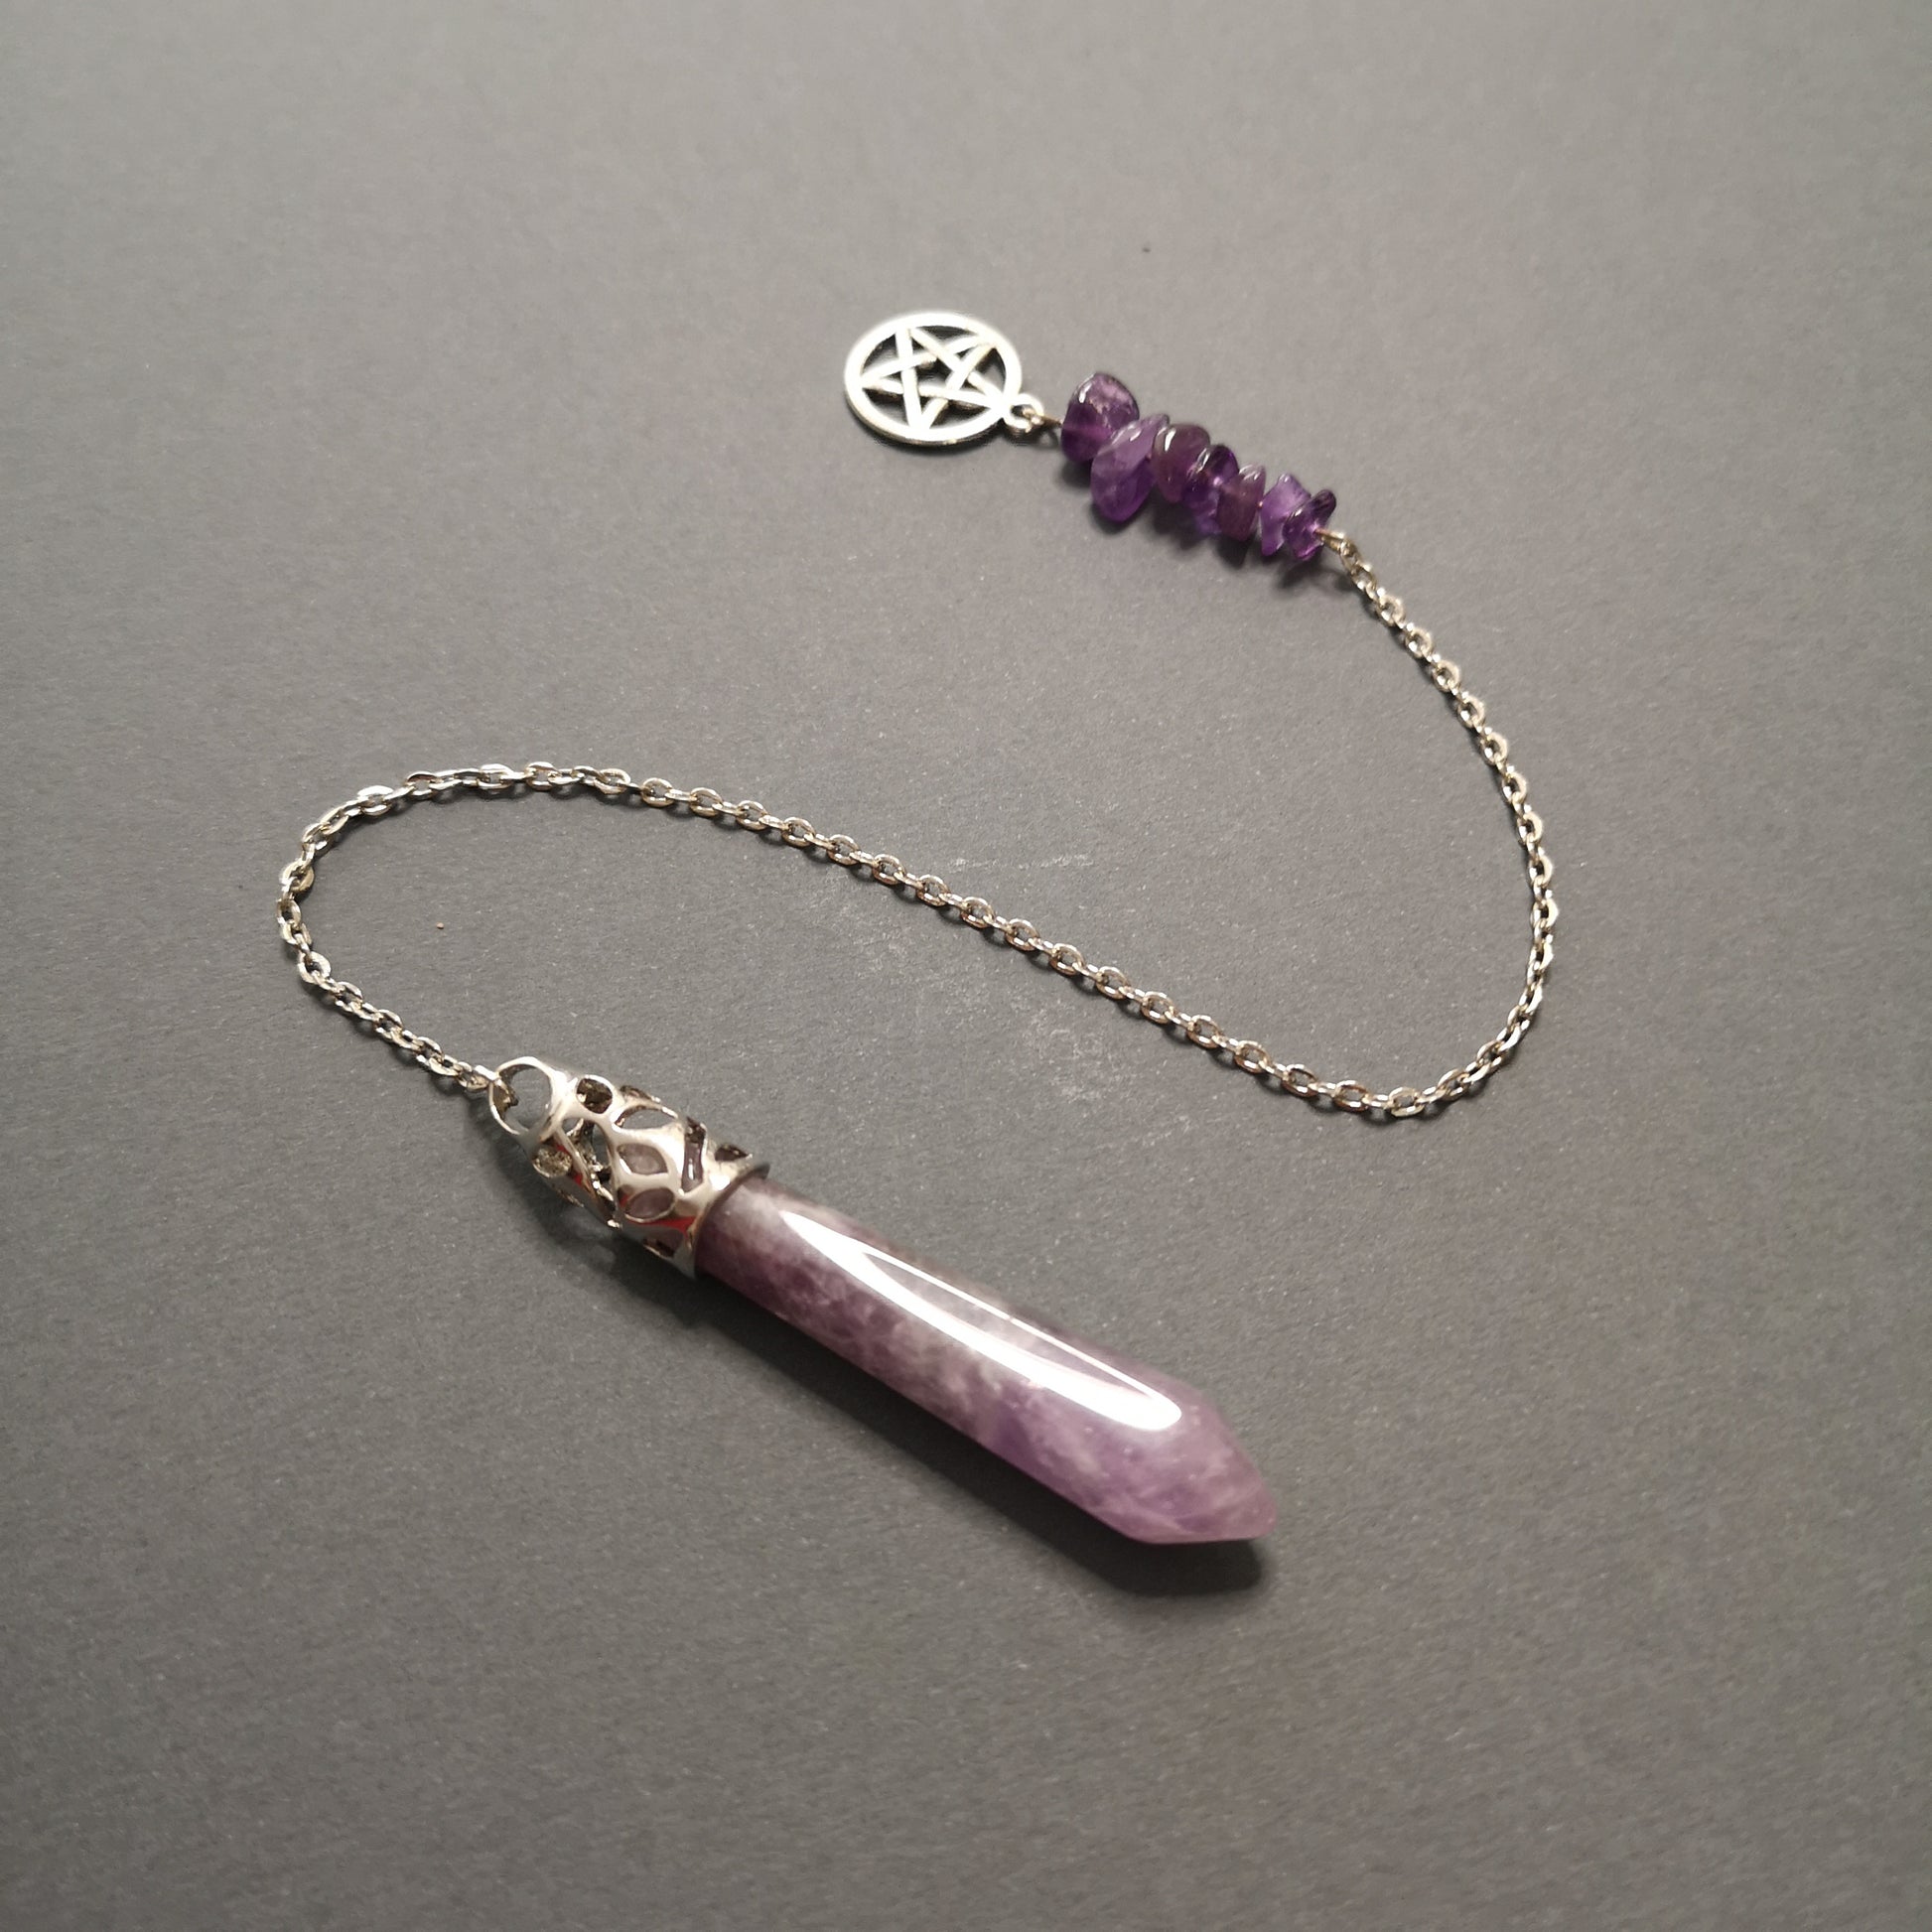 Amethyst and pentacle pendulum - The French Witch shop